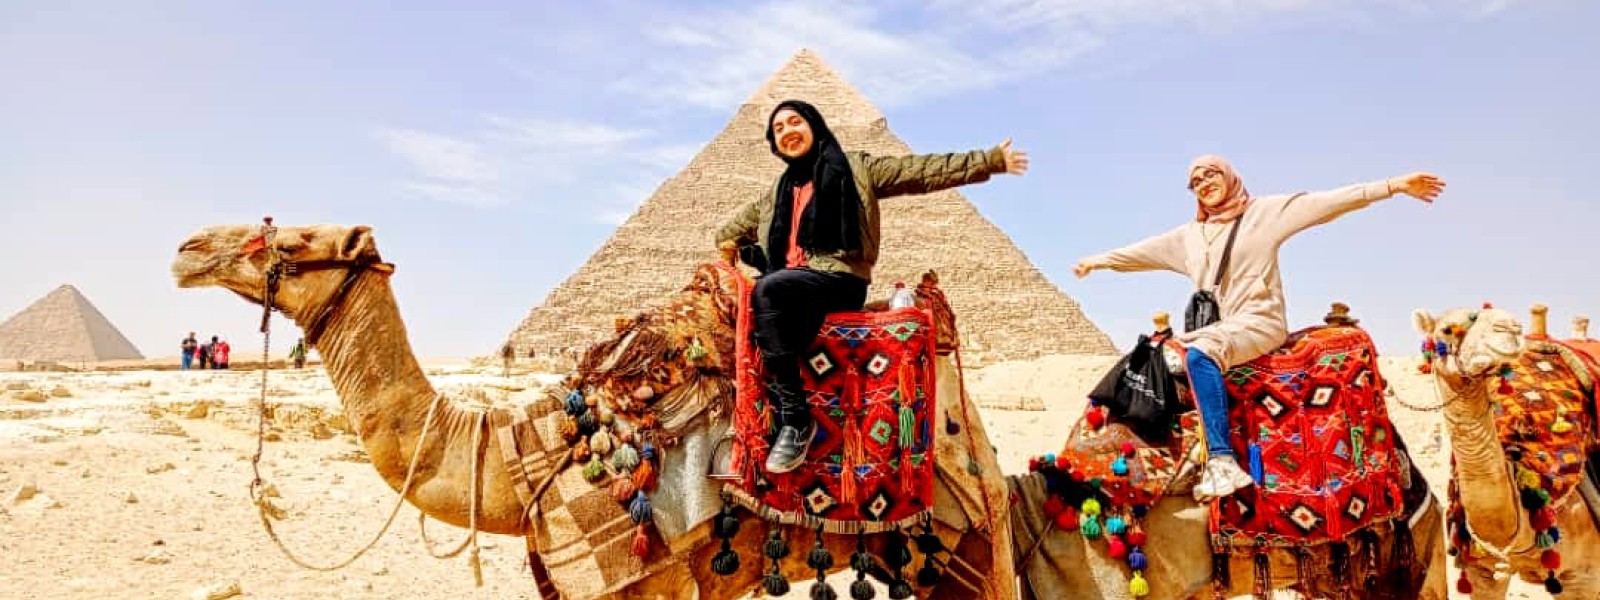 Two students on camels pose for a photo. The pyramids can be seen behind them.